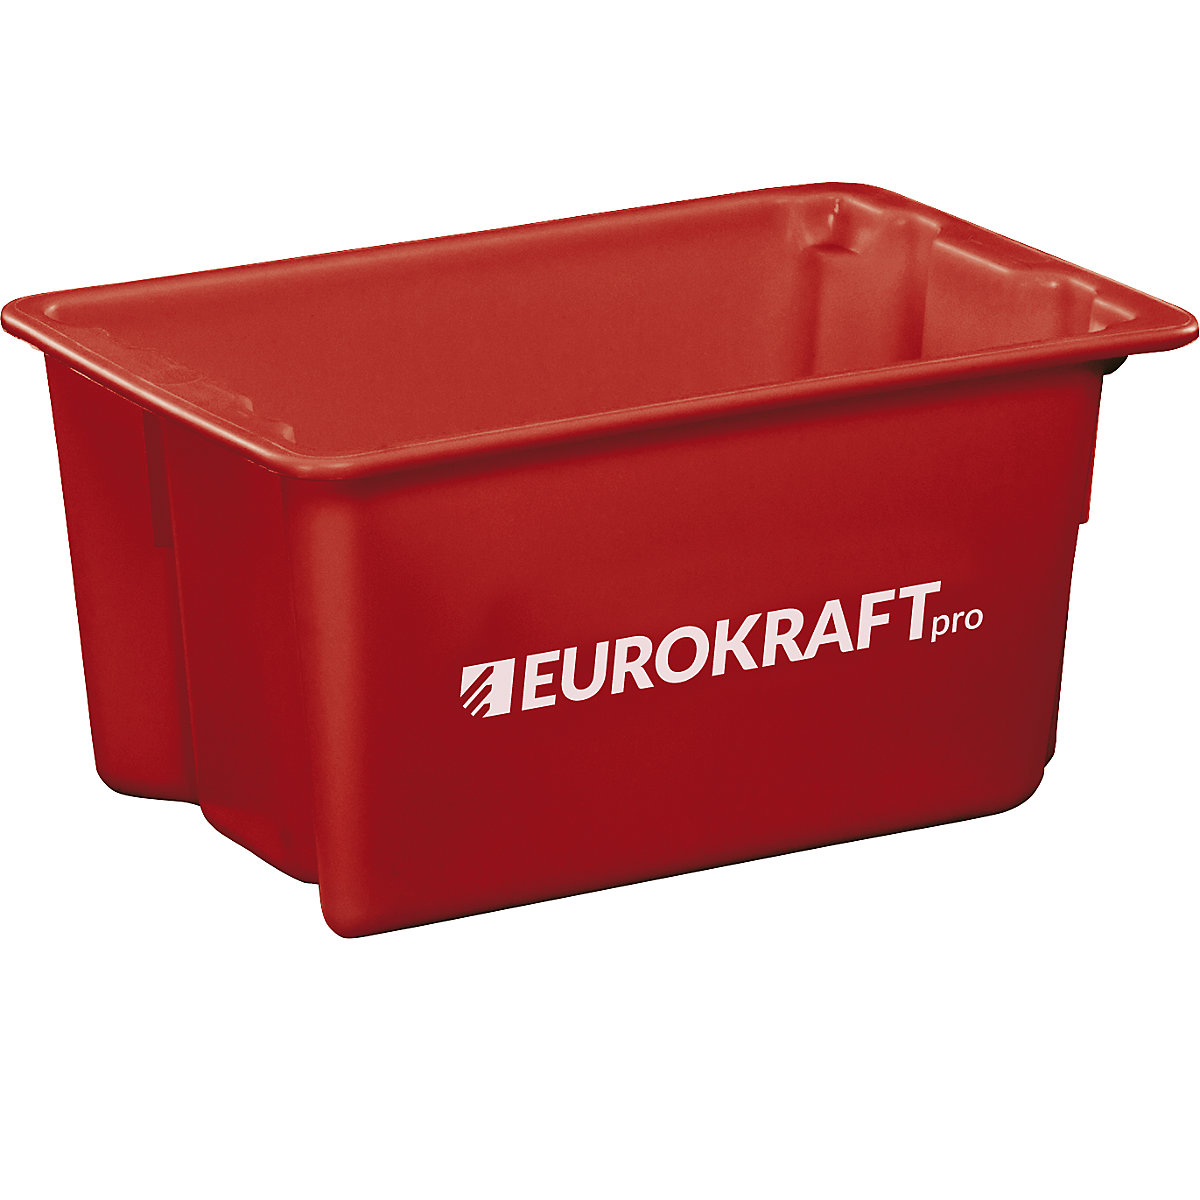 EUROKRAFTpro – Stack/nest container made of polypropylene suitable for foodstuffs, 50 l capacity, pack of 3, solid walls and base, red